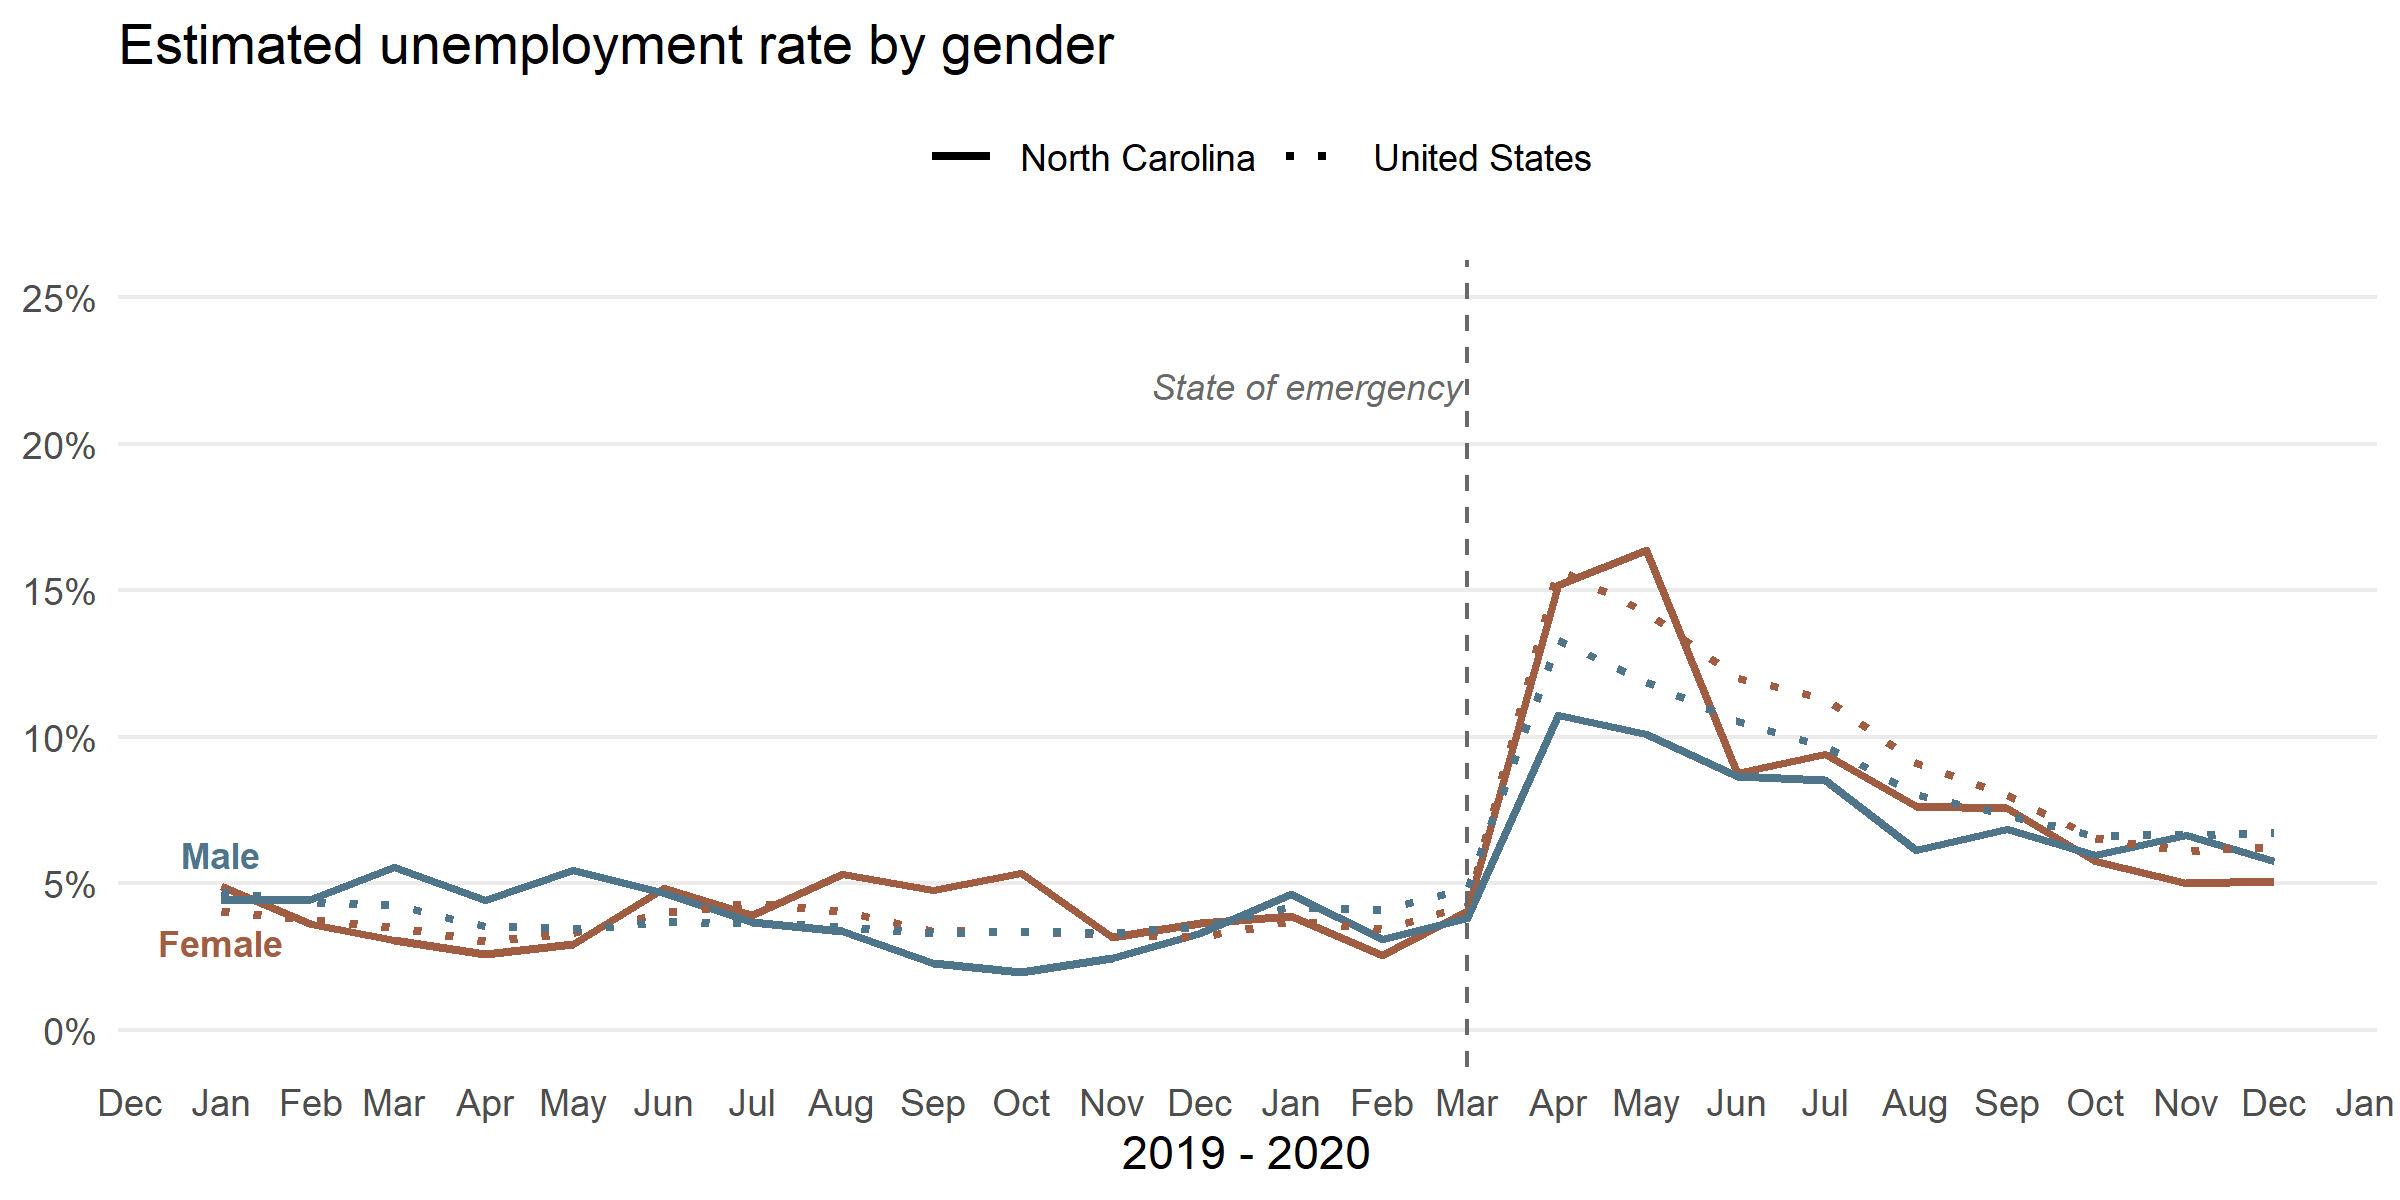 Image description: Title: "Estimated unemployment rate by gender." A line chart compares female (red) and male (blue) workers in North Carolina (solid) and the United States (dotted). All four lines are near 5% unemployment from January 2019 to March 2020. At this point, indicated by a vertical line labeled "State of Emergency," all 4 lines increase to between 10-15%, with North Carolina men (solid blue) the lowest and North Carolina women (solid red) the highest. All four lines steadily decrease to between 5-7% by December 2020.